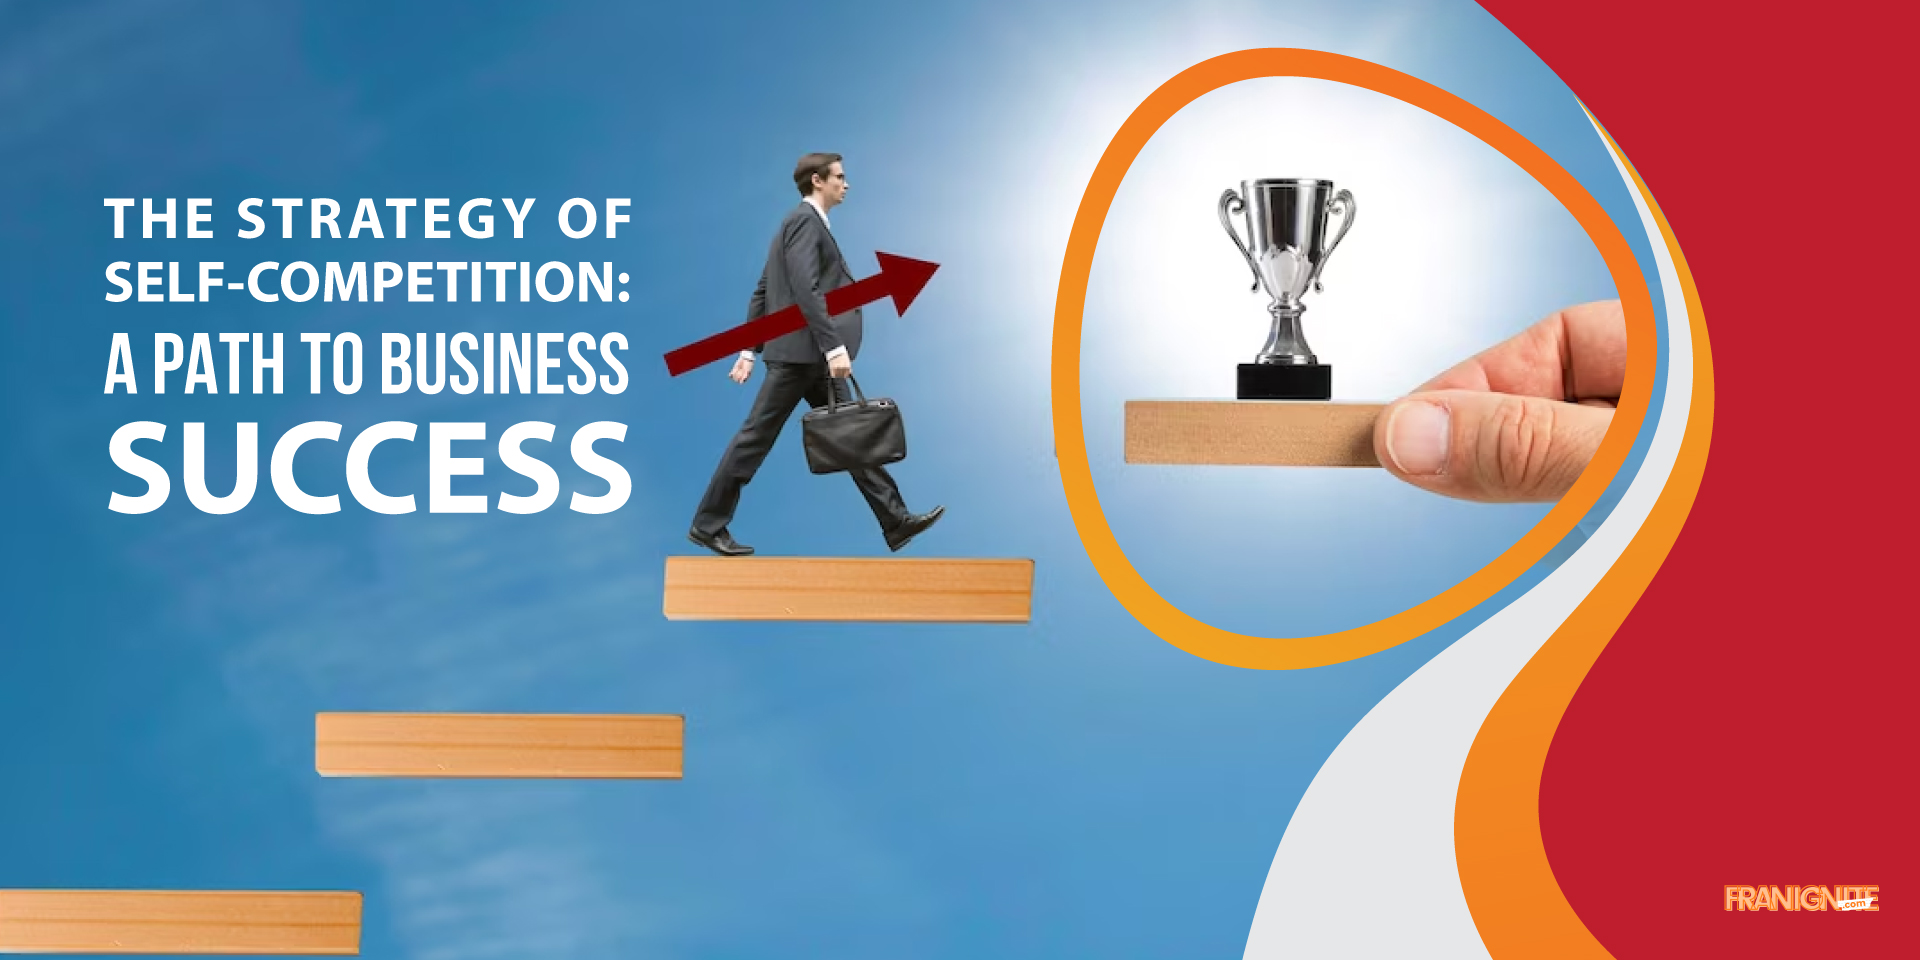 The Strategy of Self-Competition: A Path to Business Success